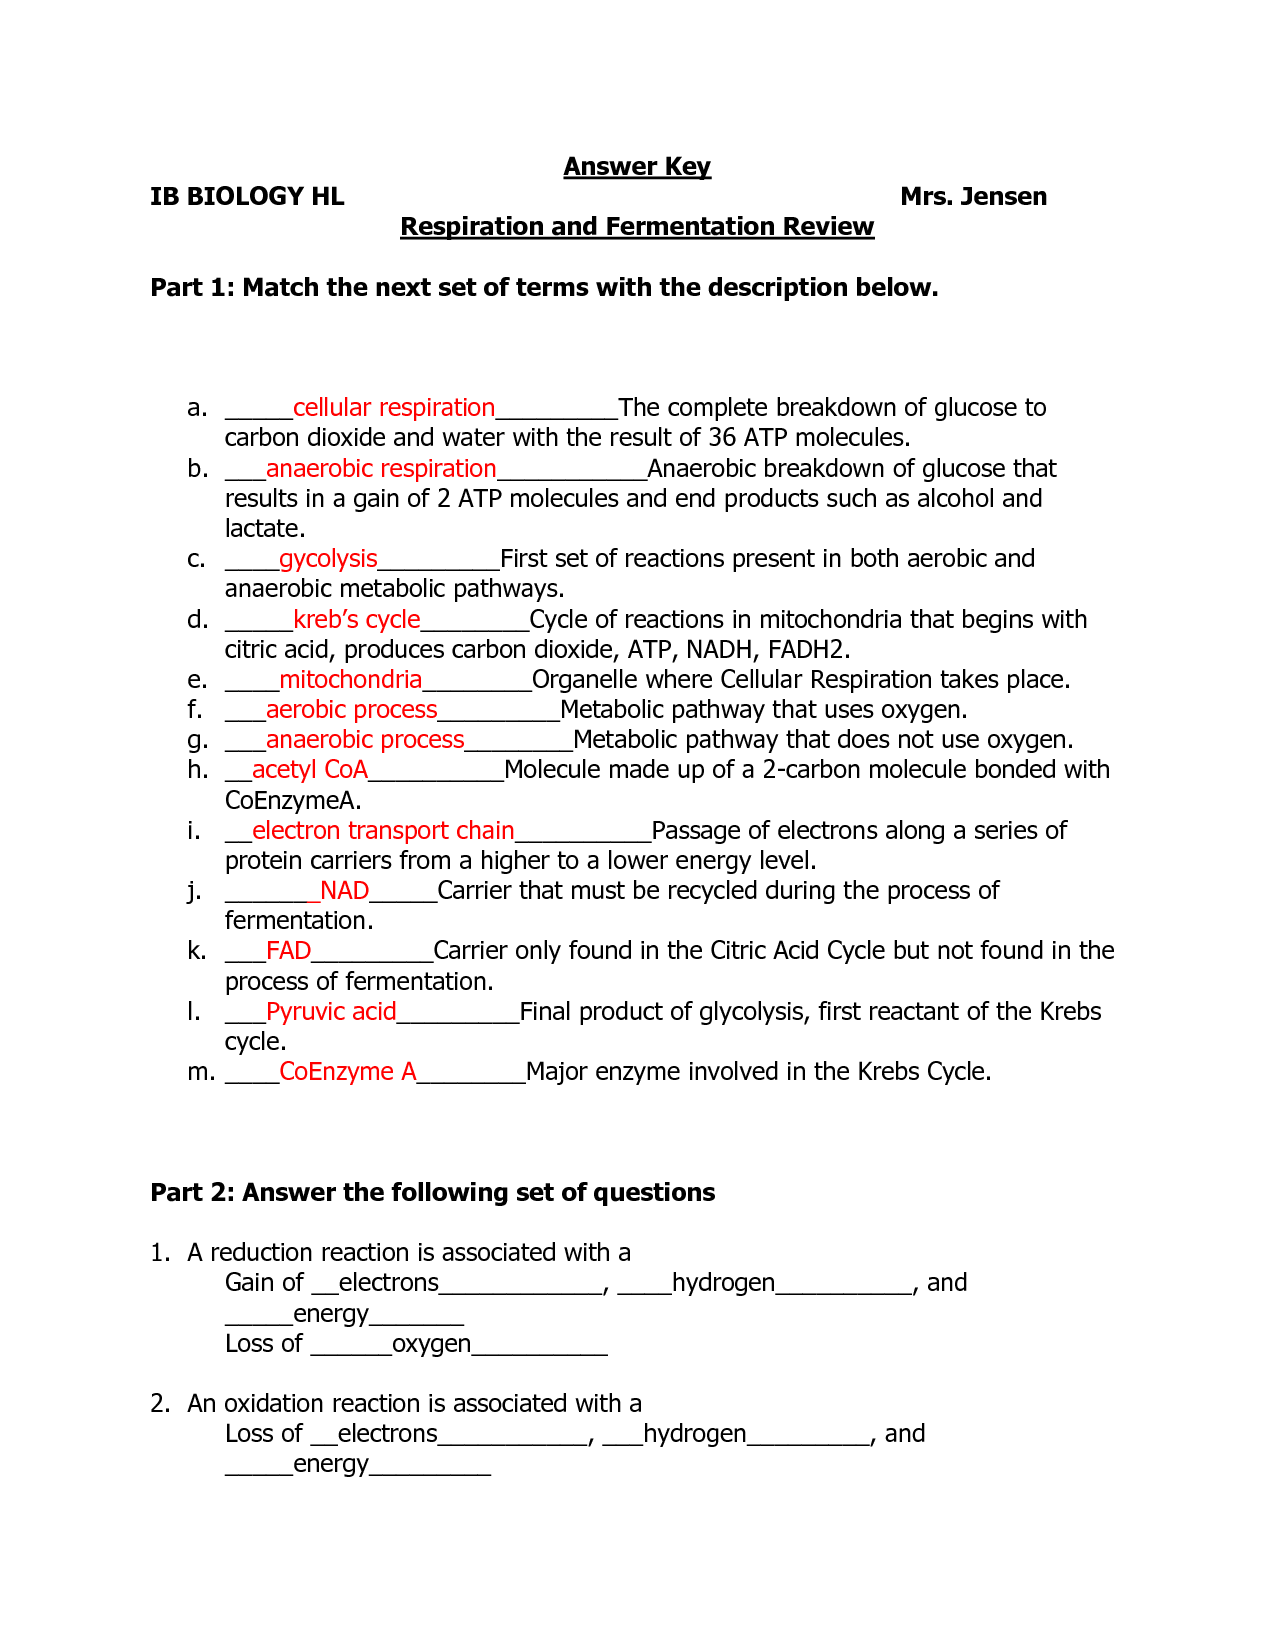 14 Best Images of Enzymes Worksheet Answer Key Enzymes